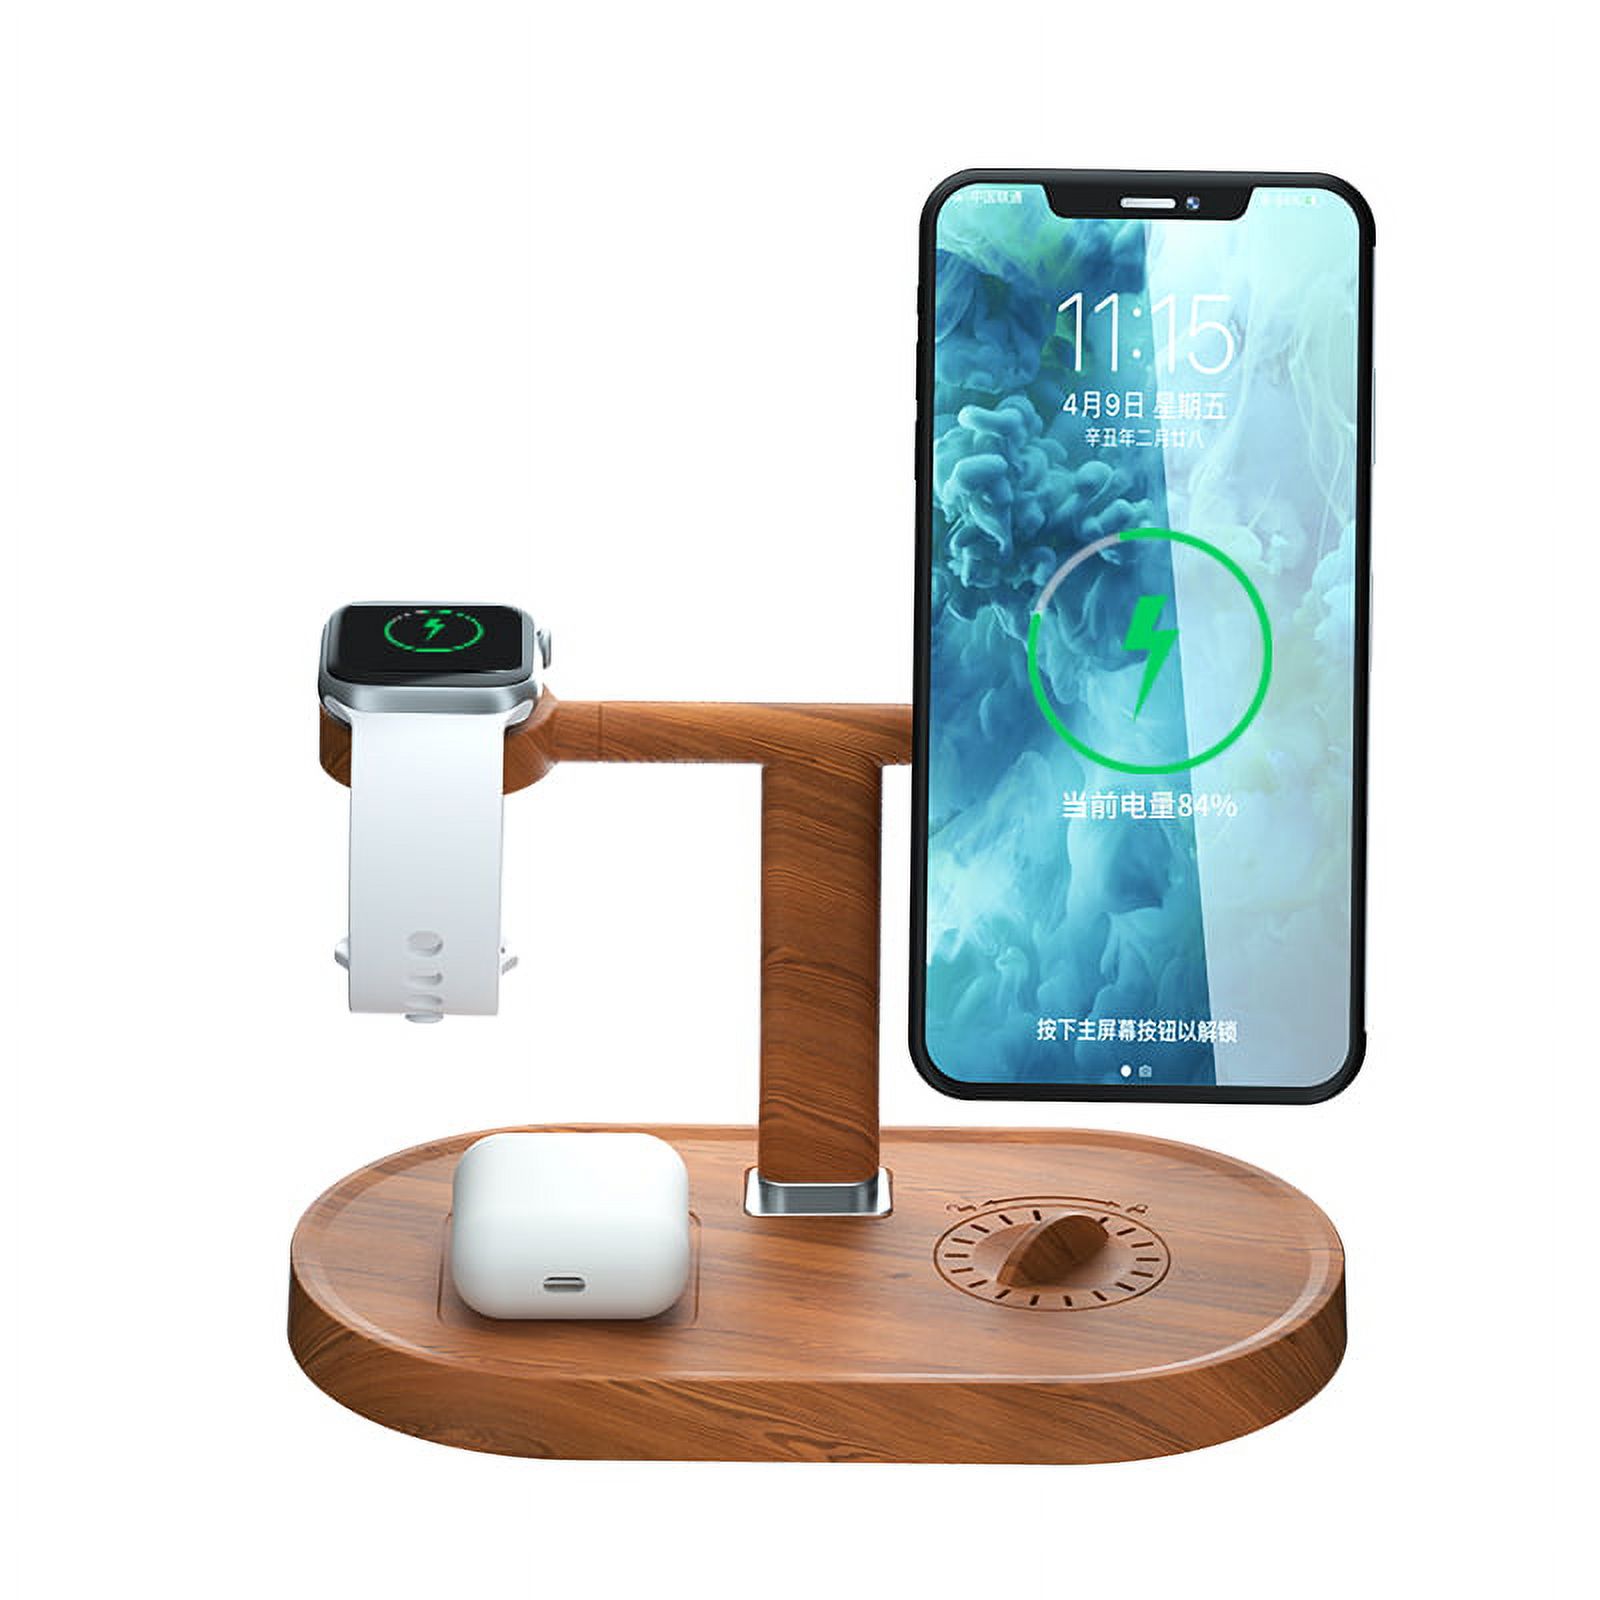 SMOIVE 3 in 1 Wireless Qi Fast Charger Dock Stand for iPhone 12 And Above &AirPods 2 and above & Apple Watch (Wood Color) - image 1 of 8